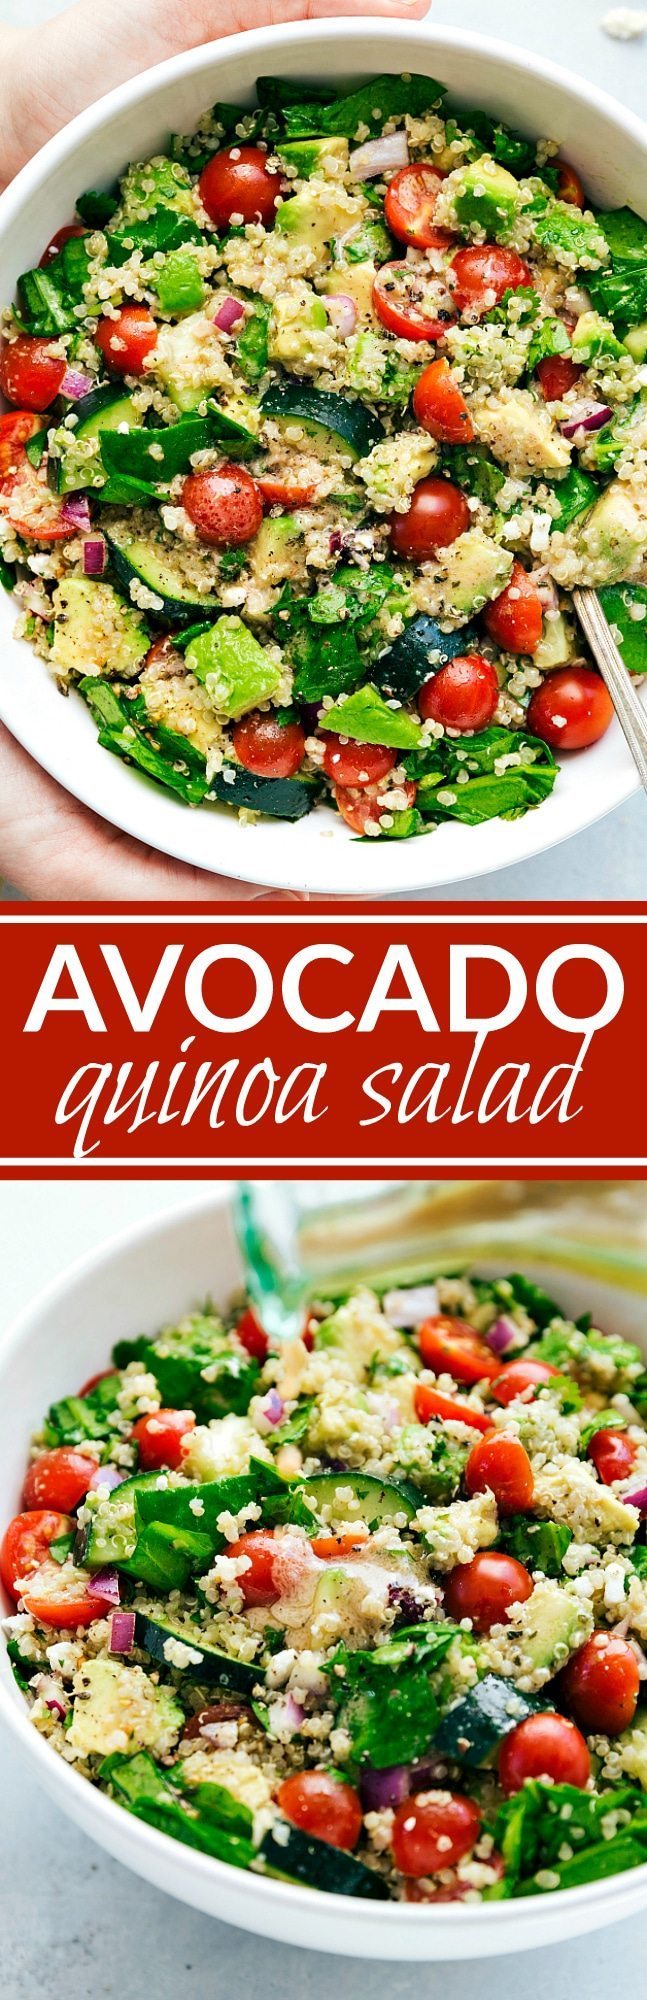 The ultimate POWER SALAD! Great for a detox or simply healthy living! Delicious quinoa, avocado, spinach salad with an amazing lemon dressing via chelseasmessyapron.com